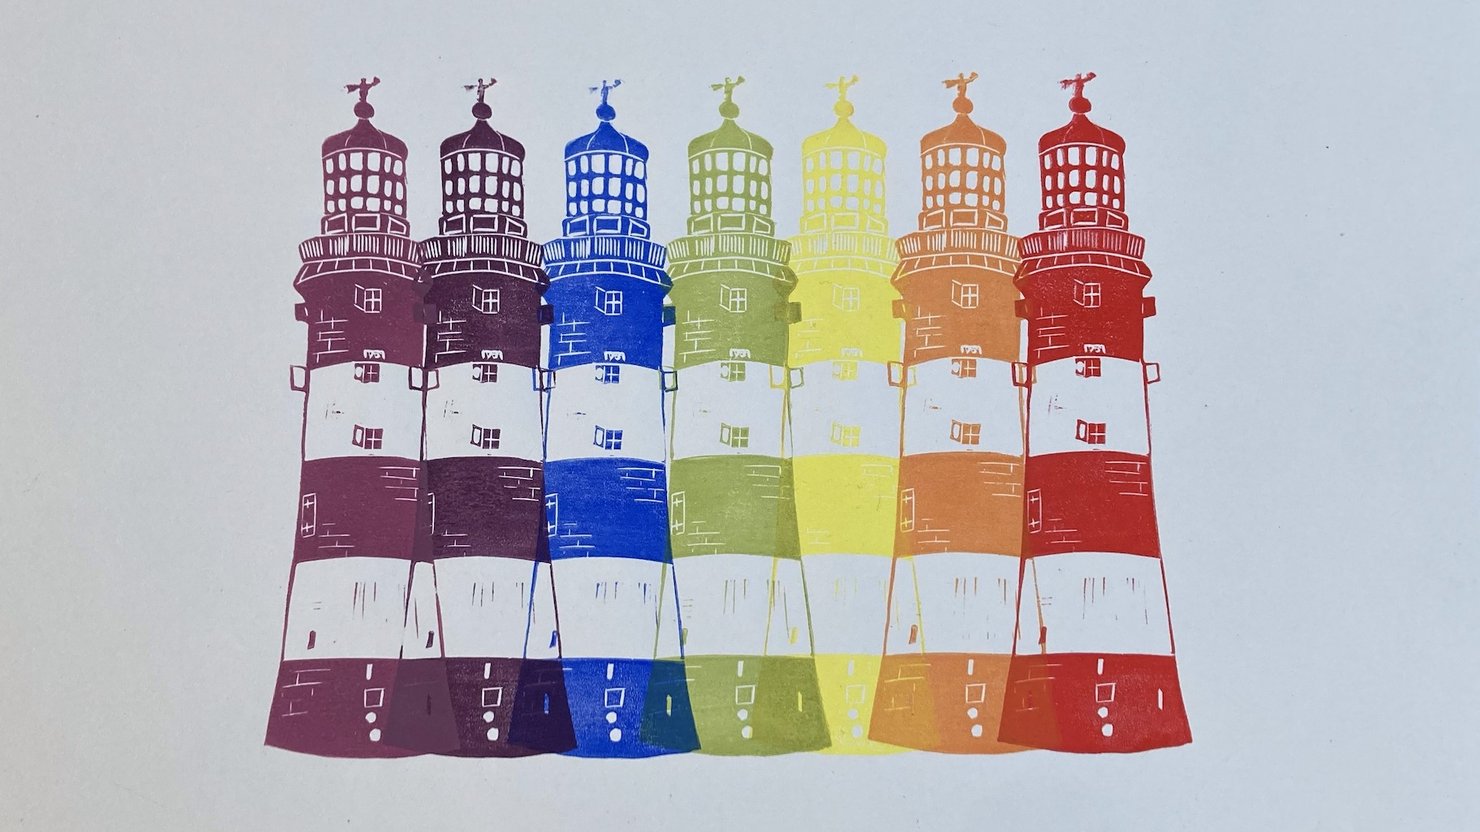 'Smeaton's Tower Rainbow' by Andrea Brown from the Selfie Wall project